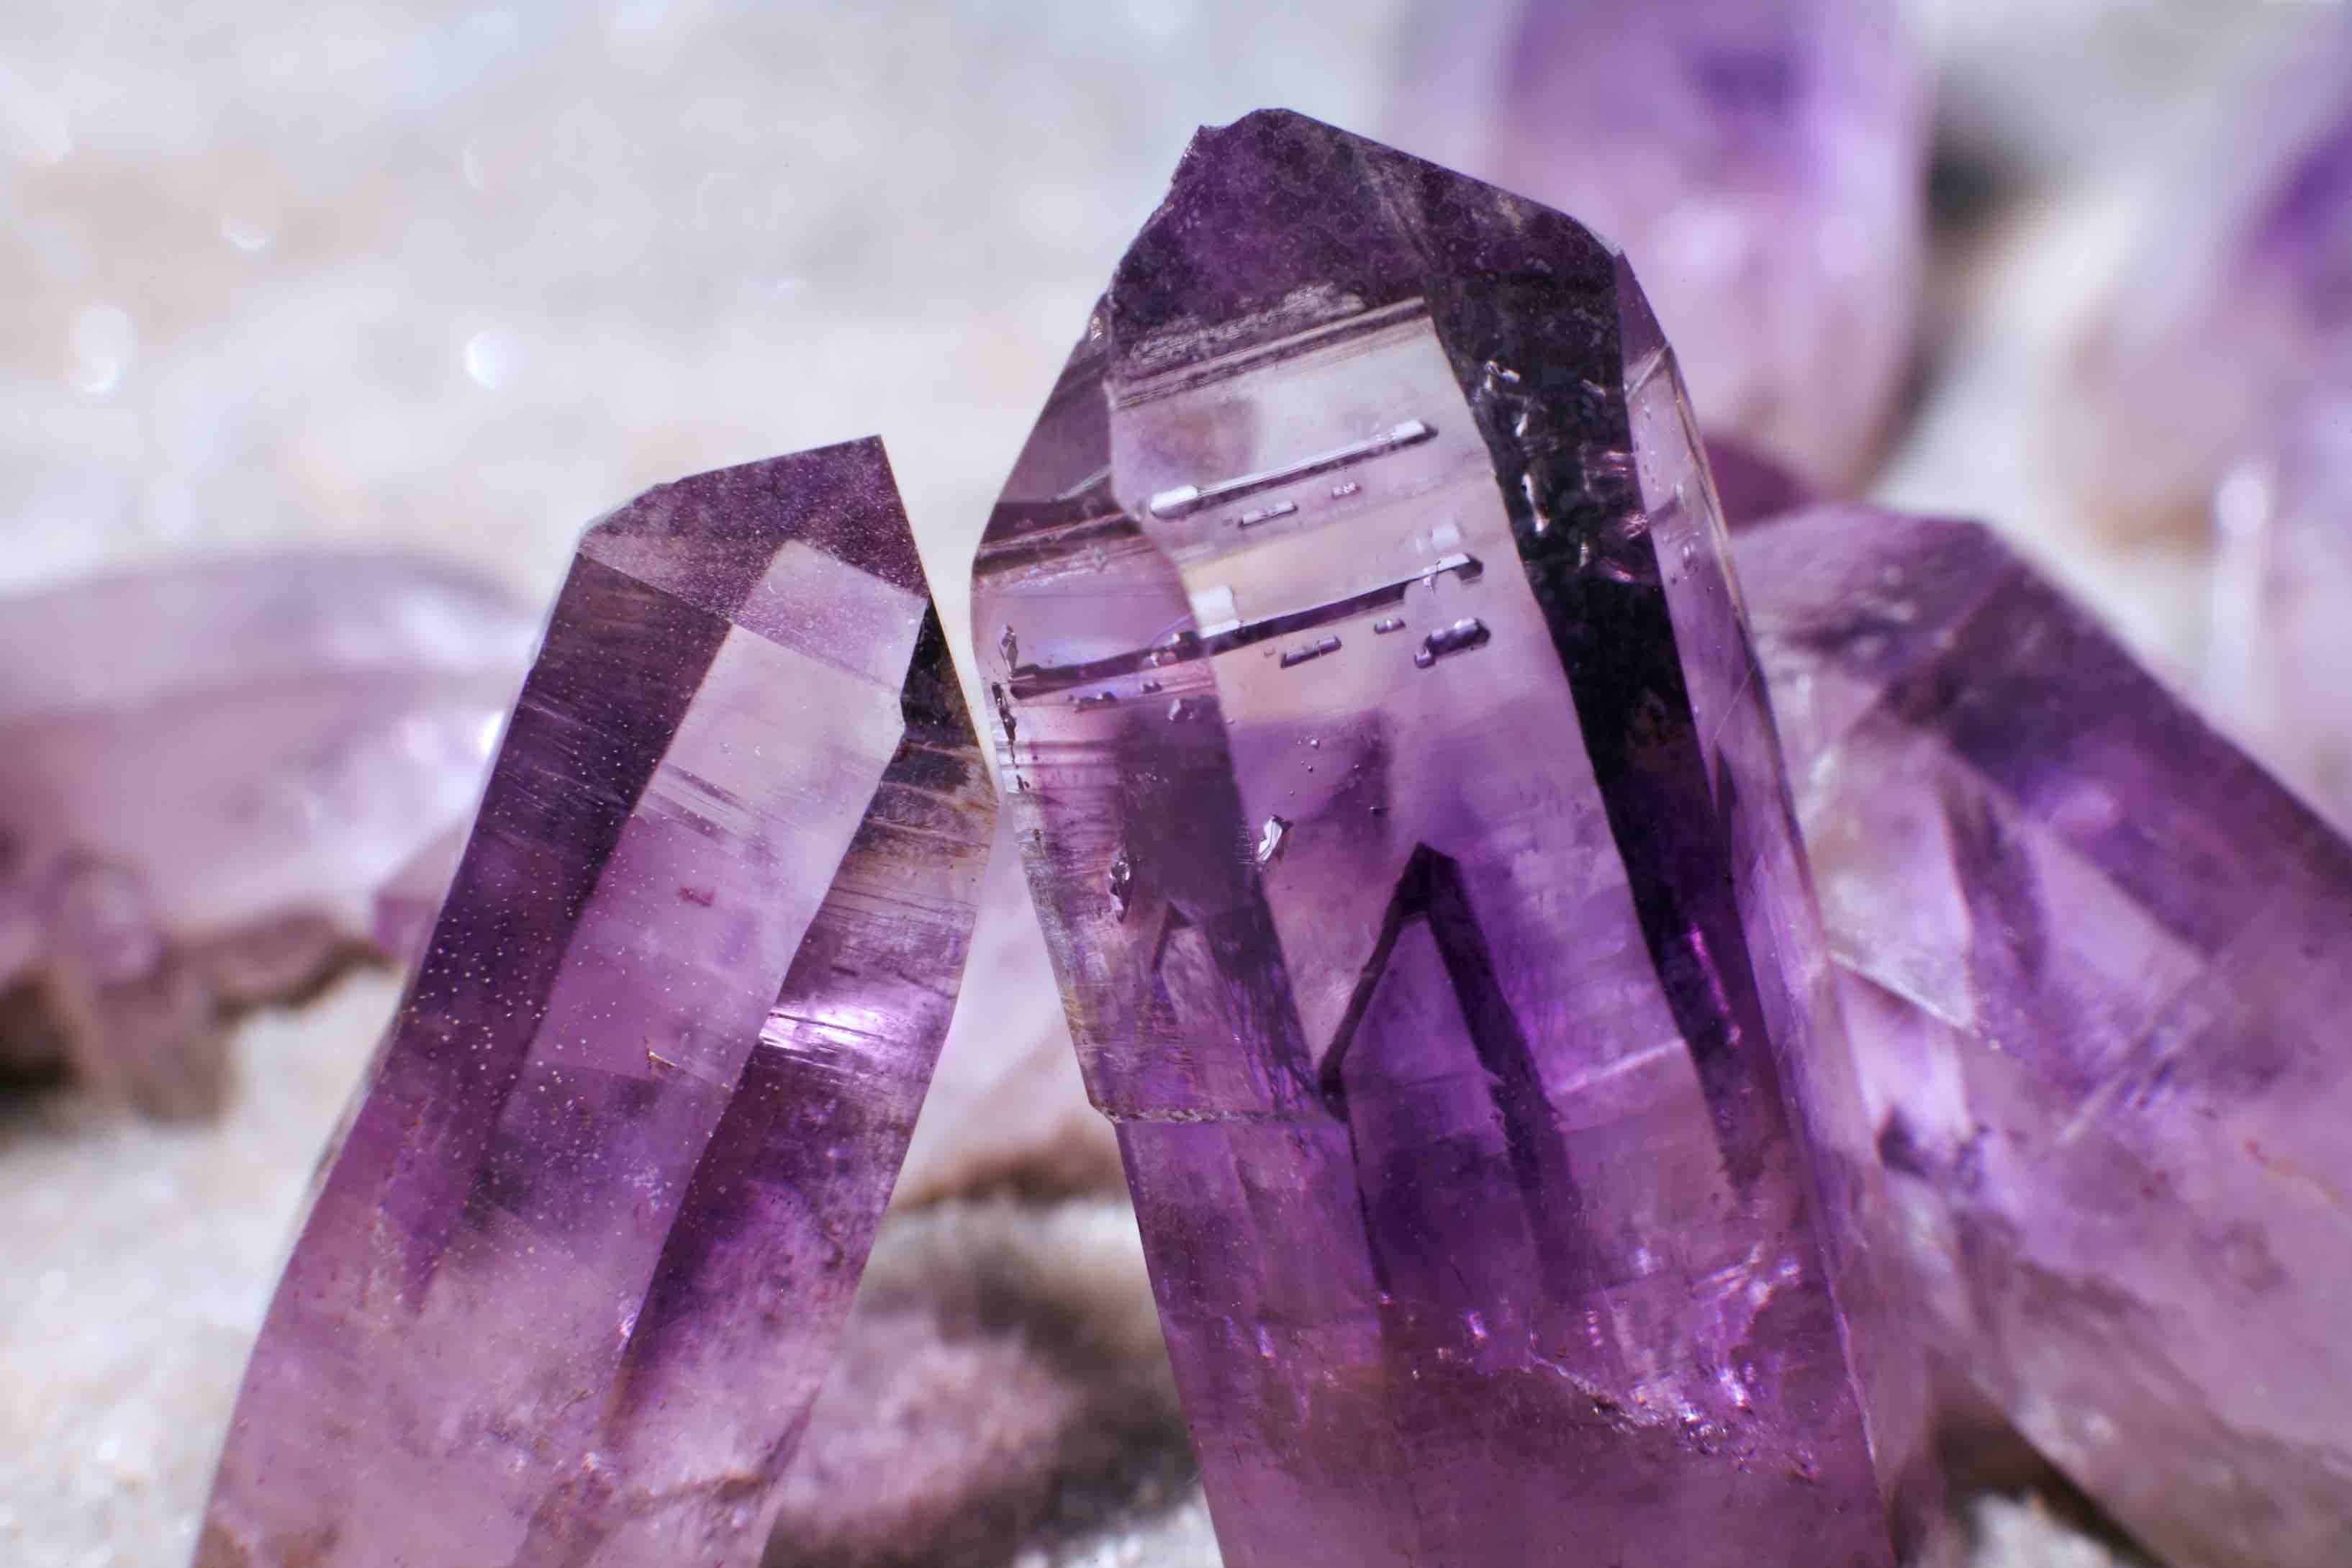 The Hoodwitch & Smashbox Have Created a Crystal-Inspired Beauty Line